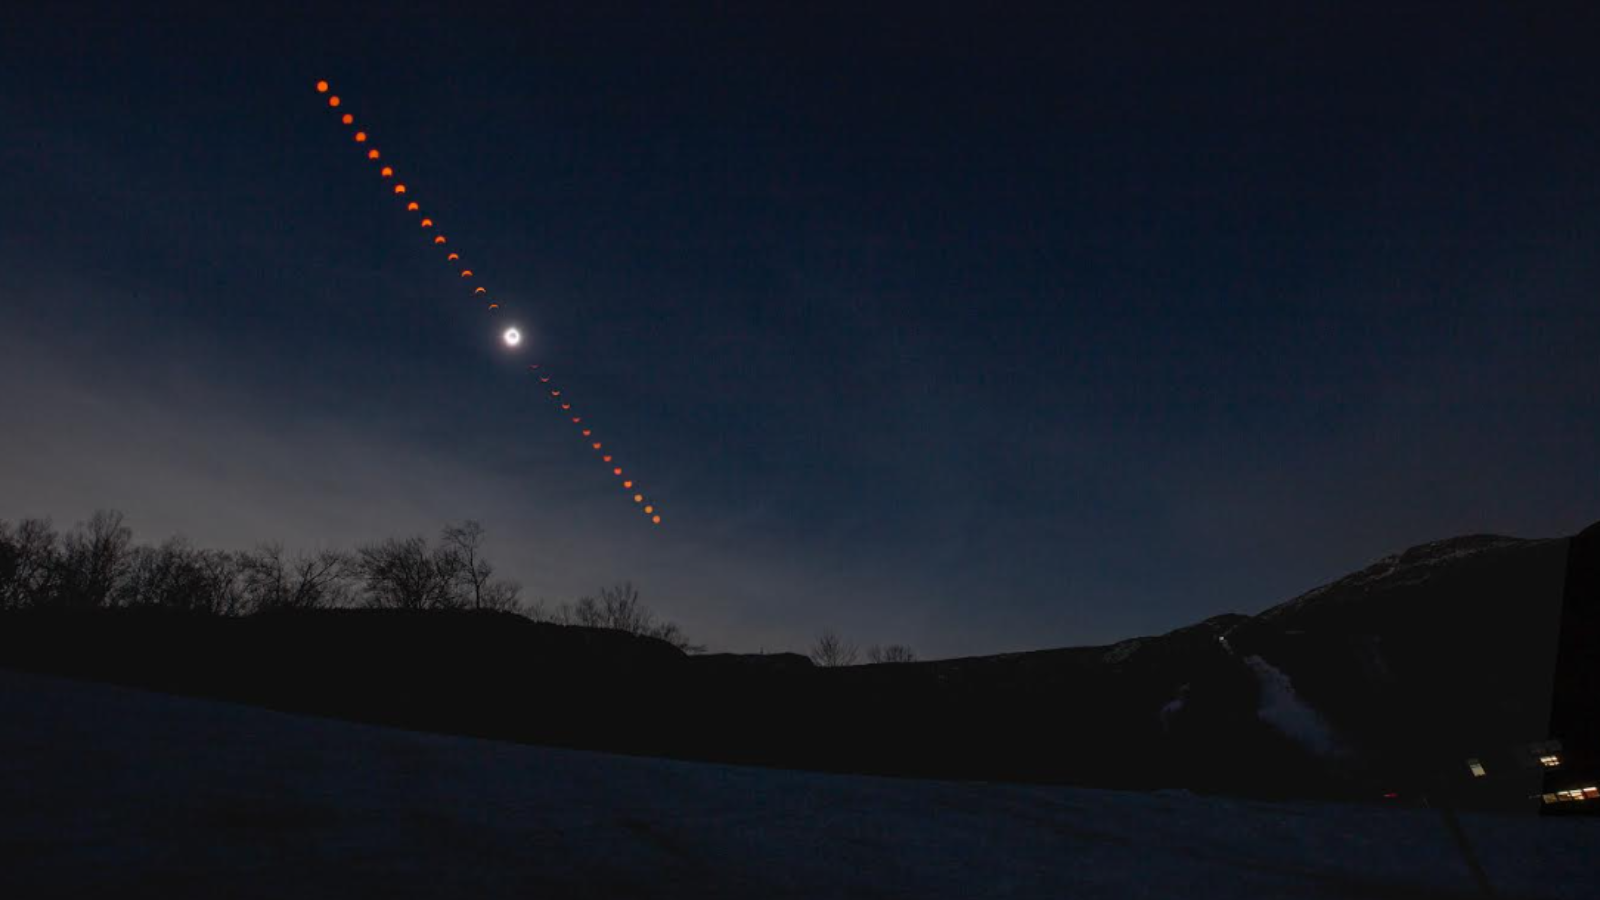 a sequence of solar eclipse images show the different stages of the eclipse.